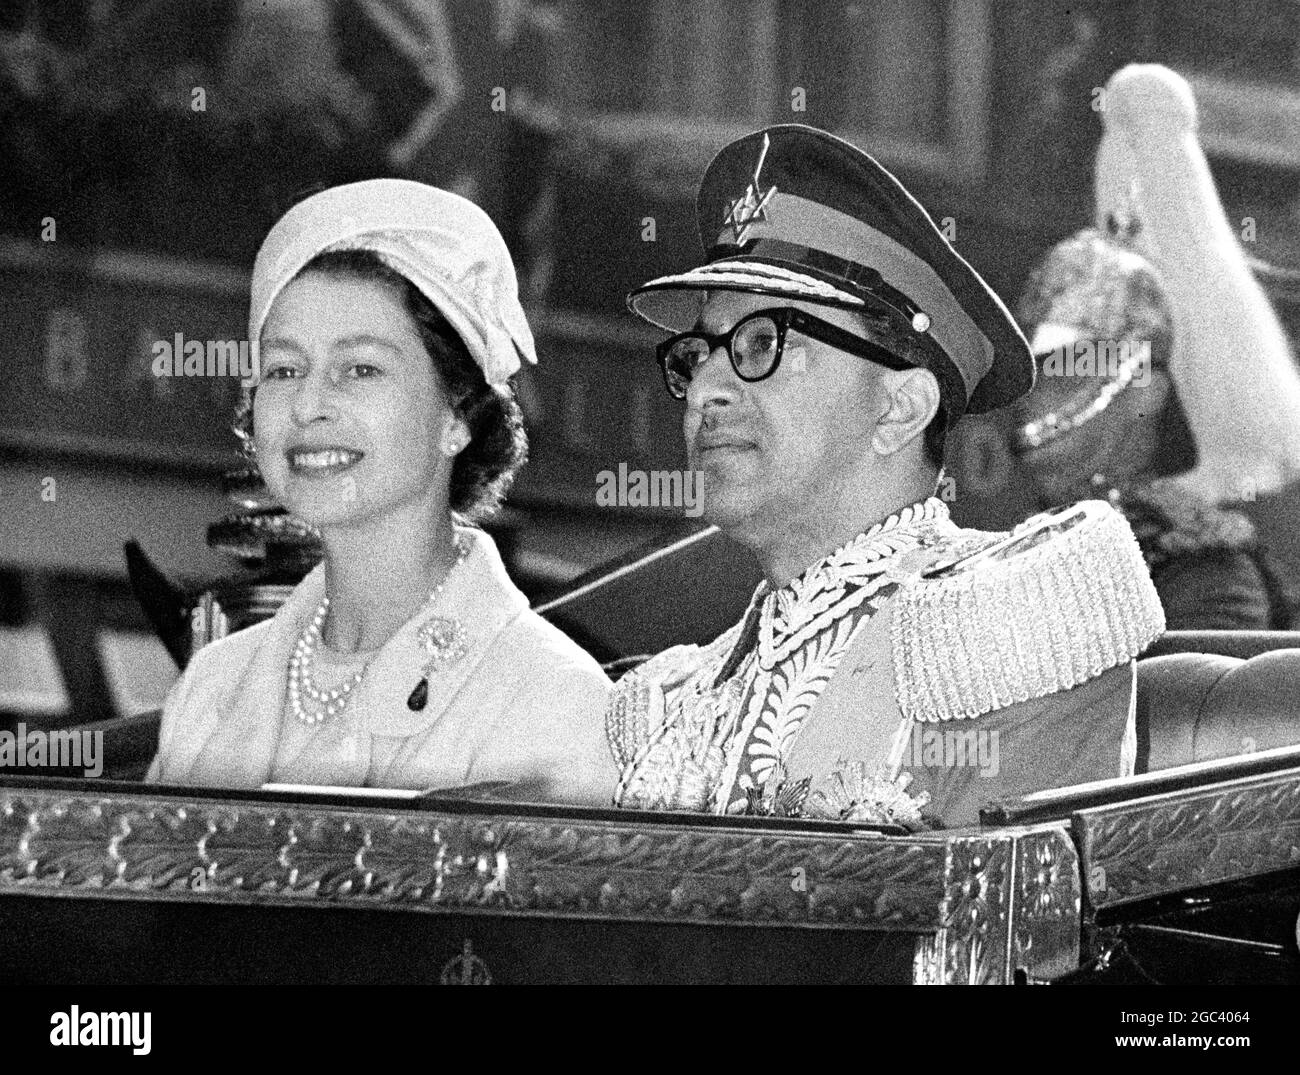 King and queen of nepal photo Black and White Stock Photos & Images - Alamy